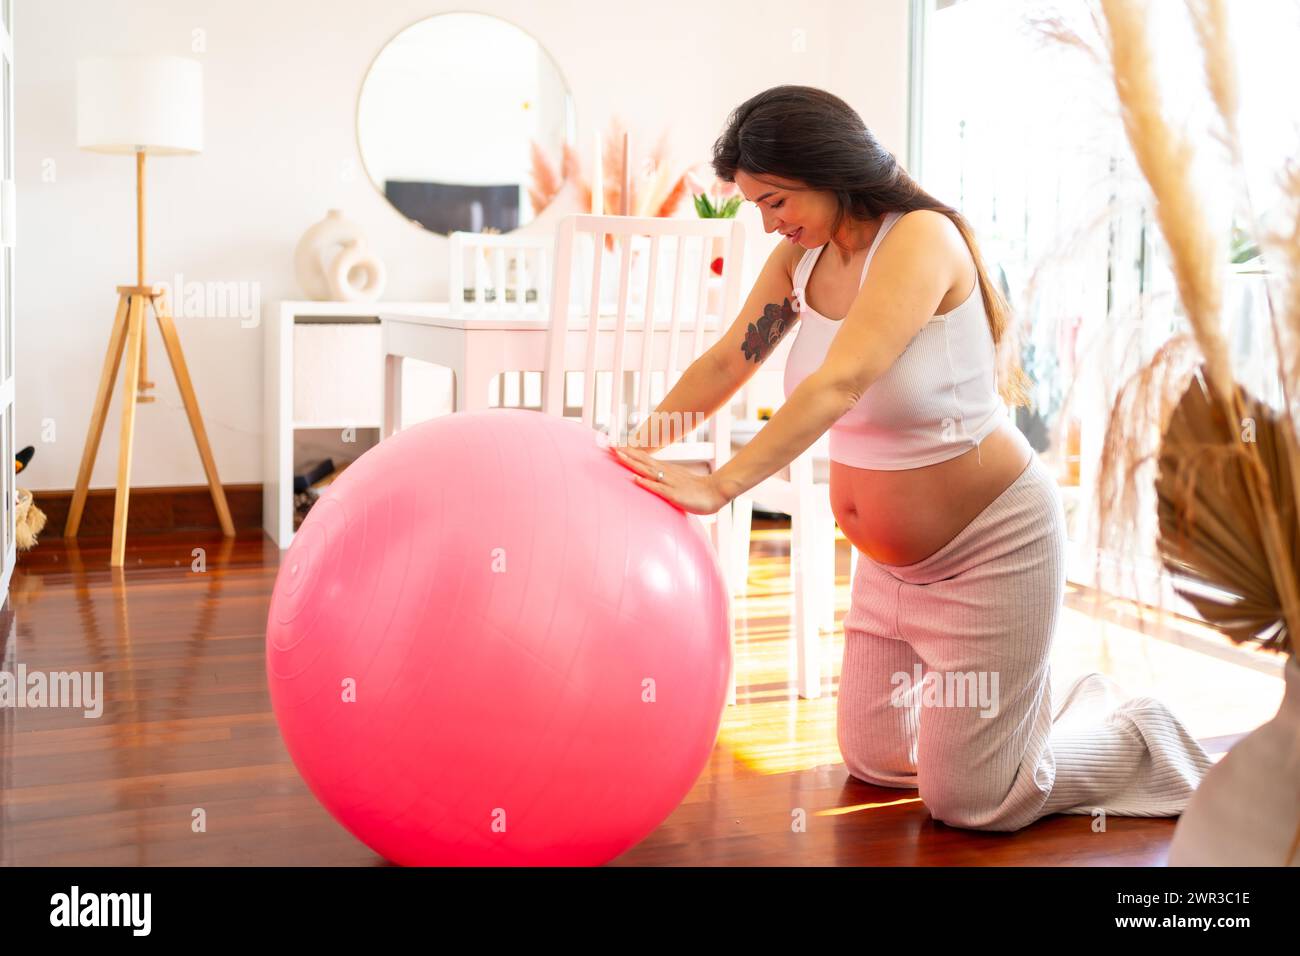 Domestic scene of a beauty pregnant woman using pink pilates ball to exercise at home Stock Photo